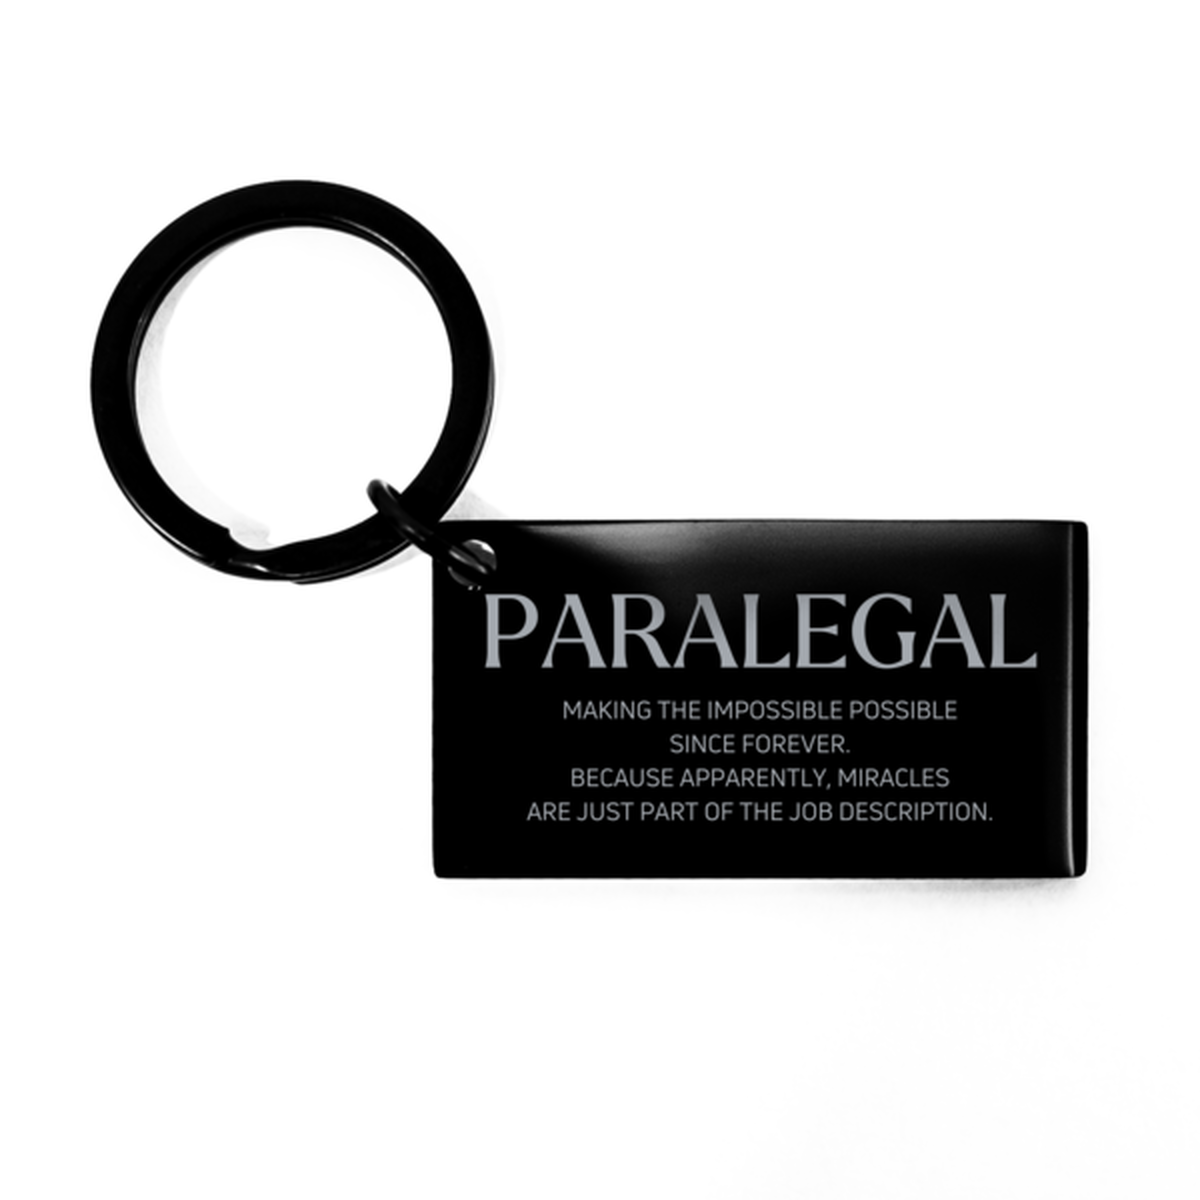 Funny Paralegal Gifts, Miracles are just part of the job description, Inspirational Birthday Keychain For Paralegal, Men, Women, Coworkers, Friends, Boss